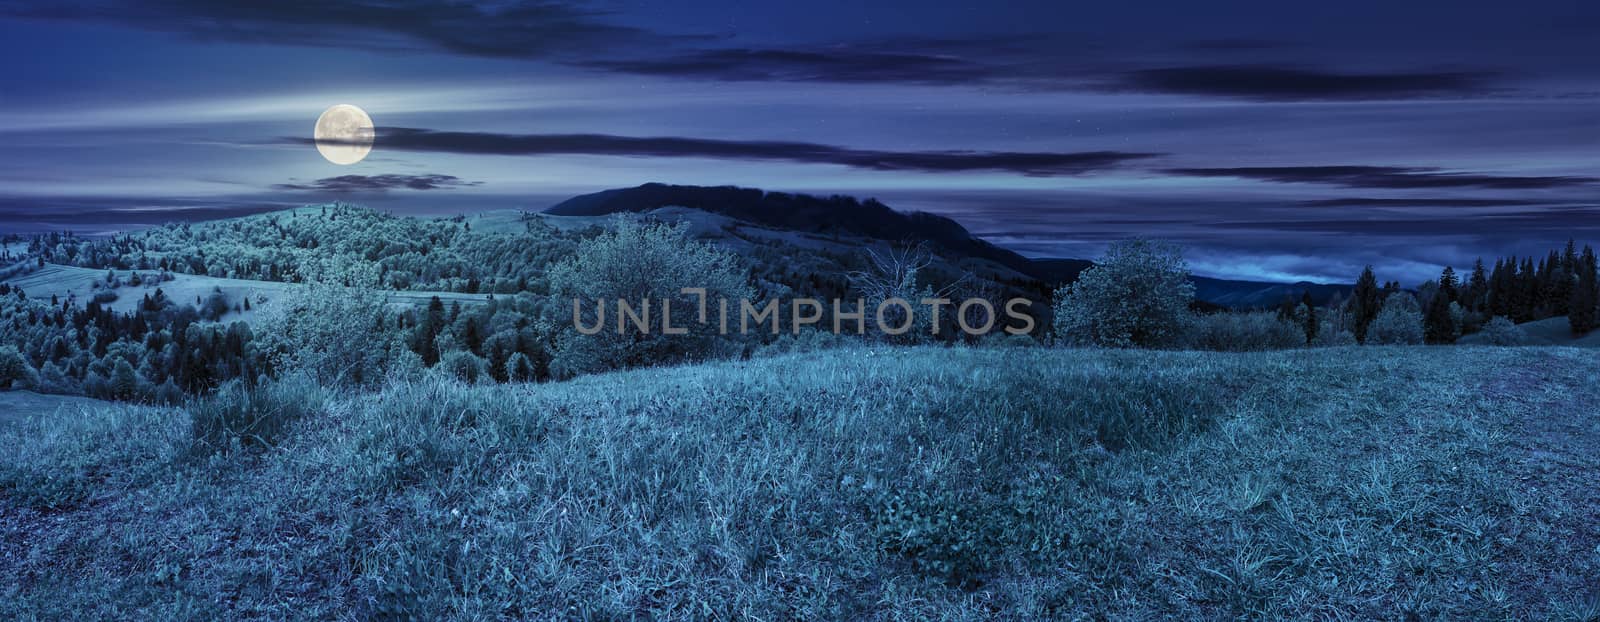 meadow near forest in mountains at night by Pellinni